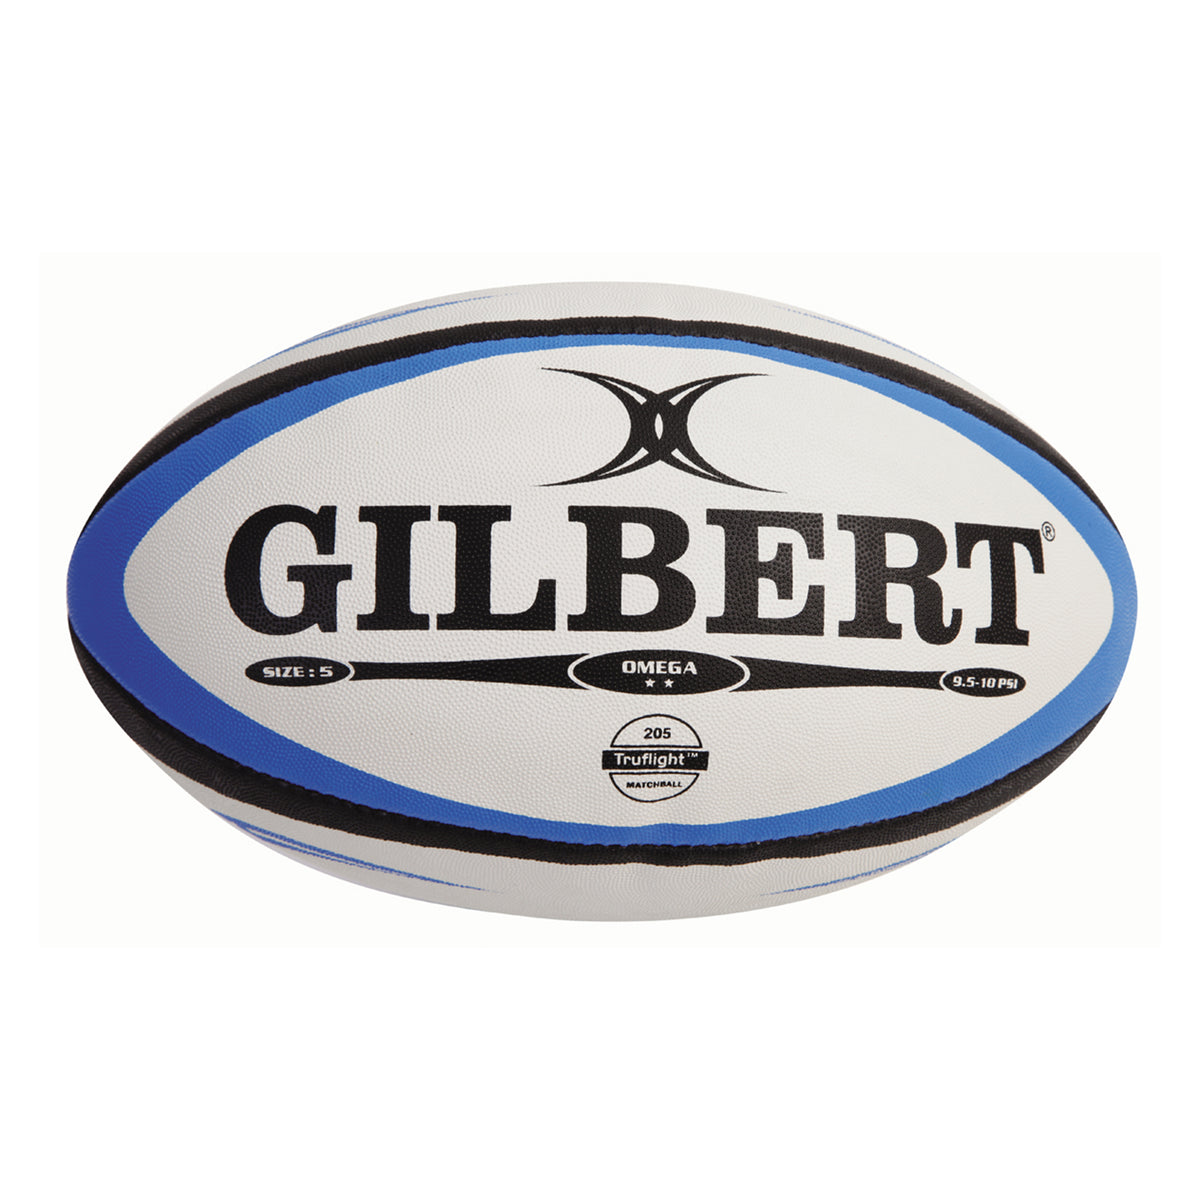 Gilbert Omega Match Rugby Ball - Size 4 (Pack 6): Blue/Black